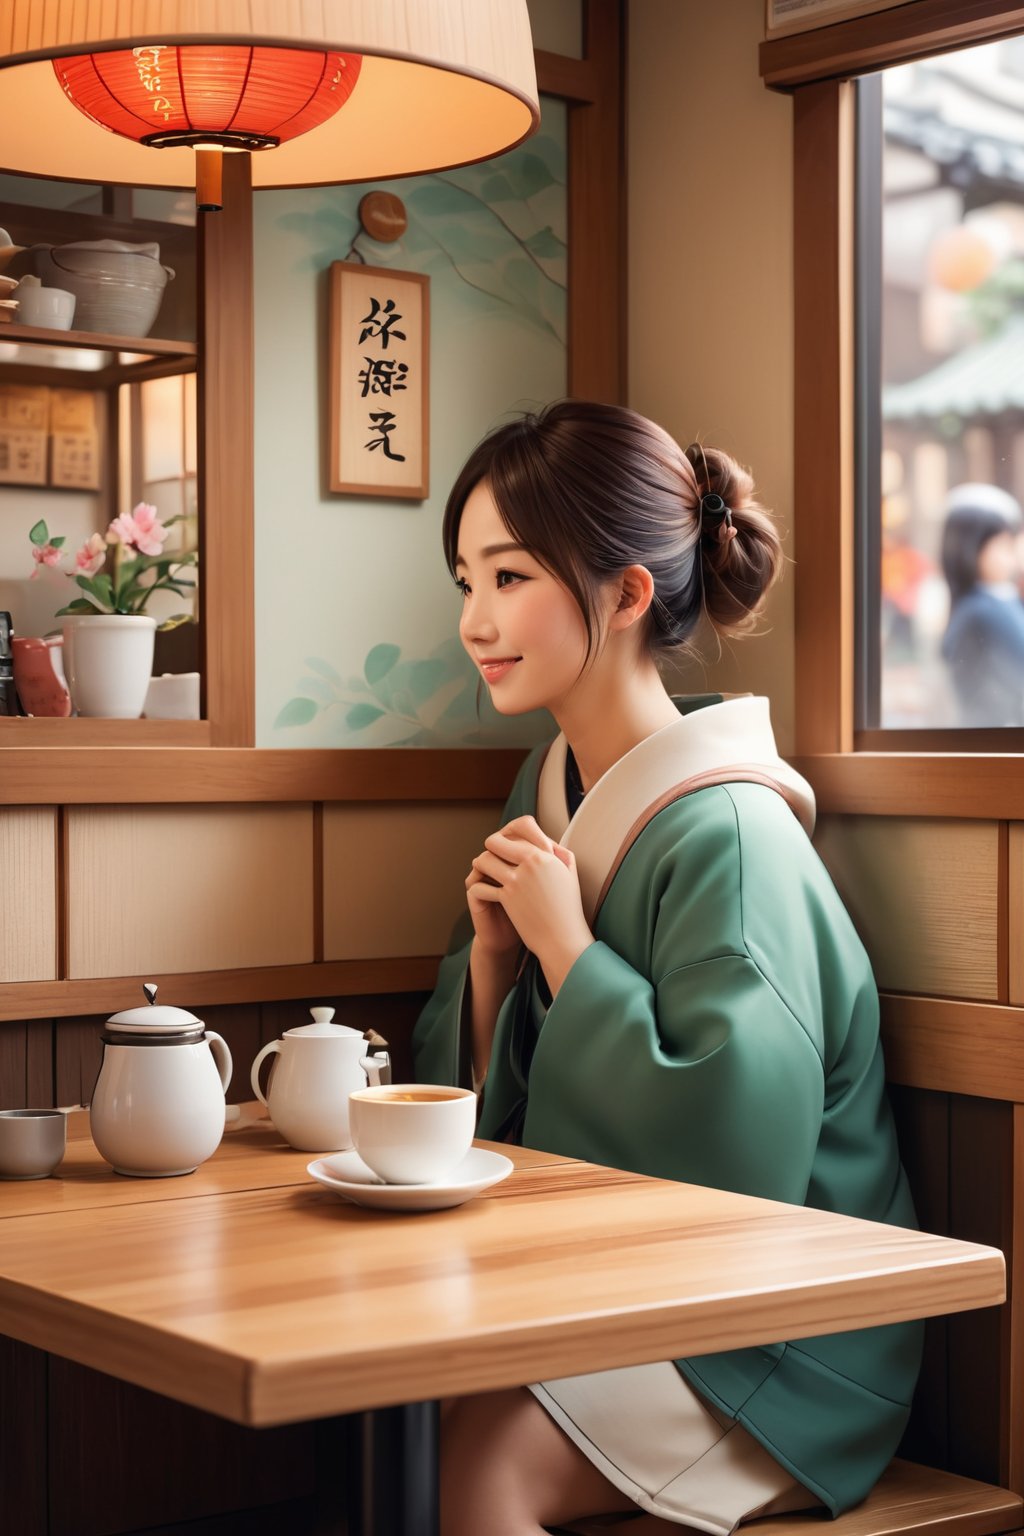 Illustrate a cozy scene in a Japanese café, portraying characters enjoying a quiet, heartwarming moment. Utilize soft, warm colors, focusing on character interactions and expressions, and bring out the charm of the café setting.